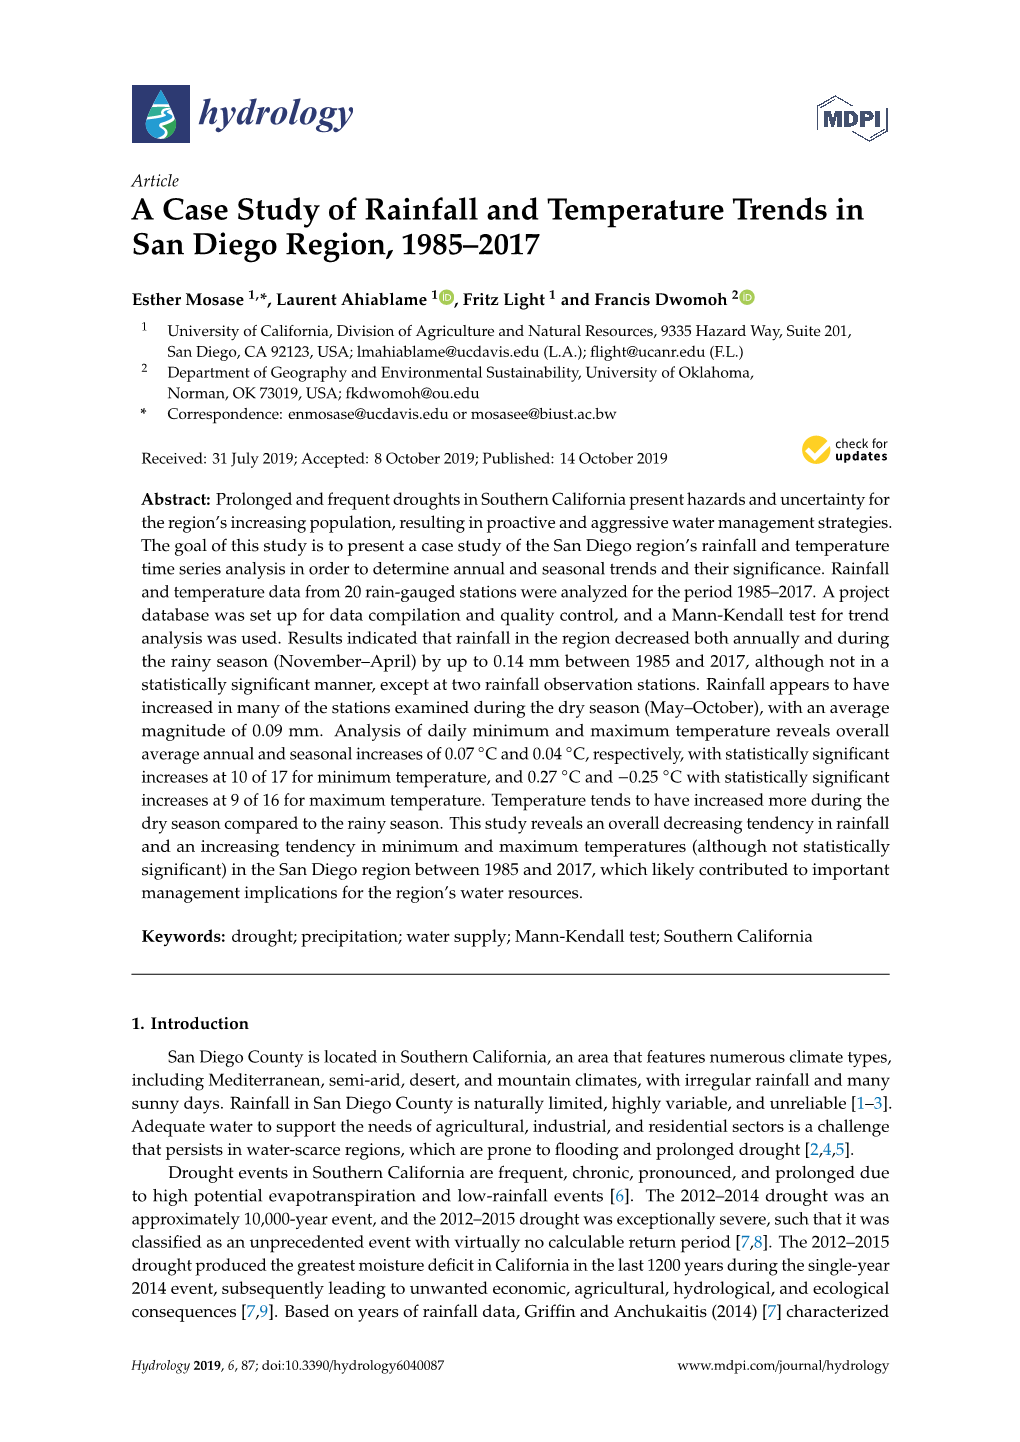 A Case Study of Rainfall and Temperature Trends in San Diego Region, 1985–2017